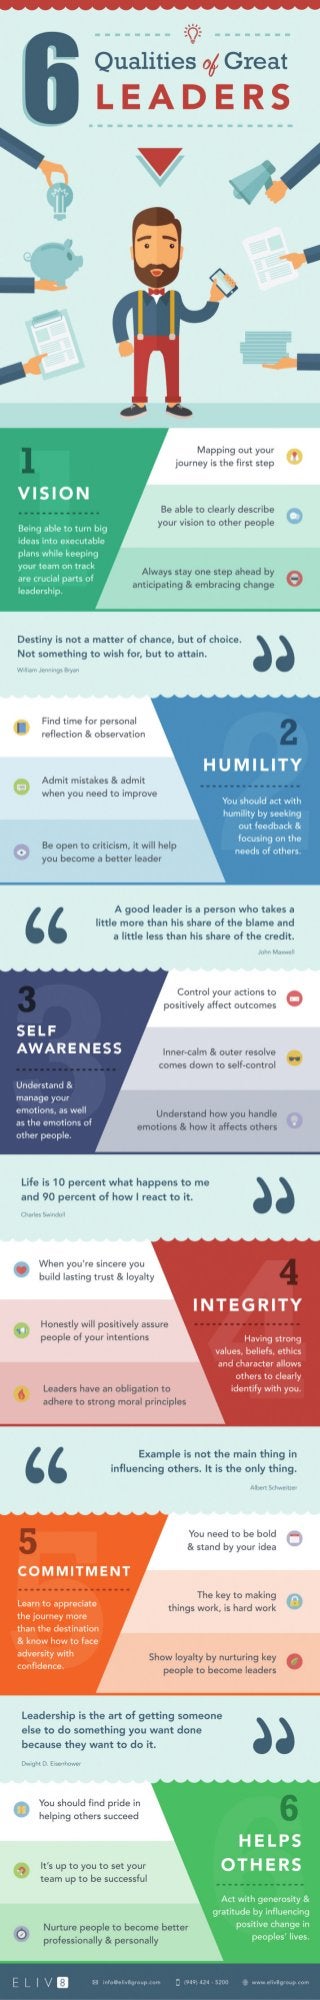 Top 6 Qualities of Great Leaders (Infographic)